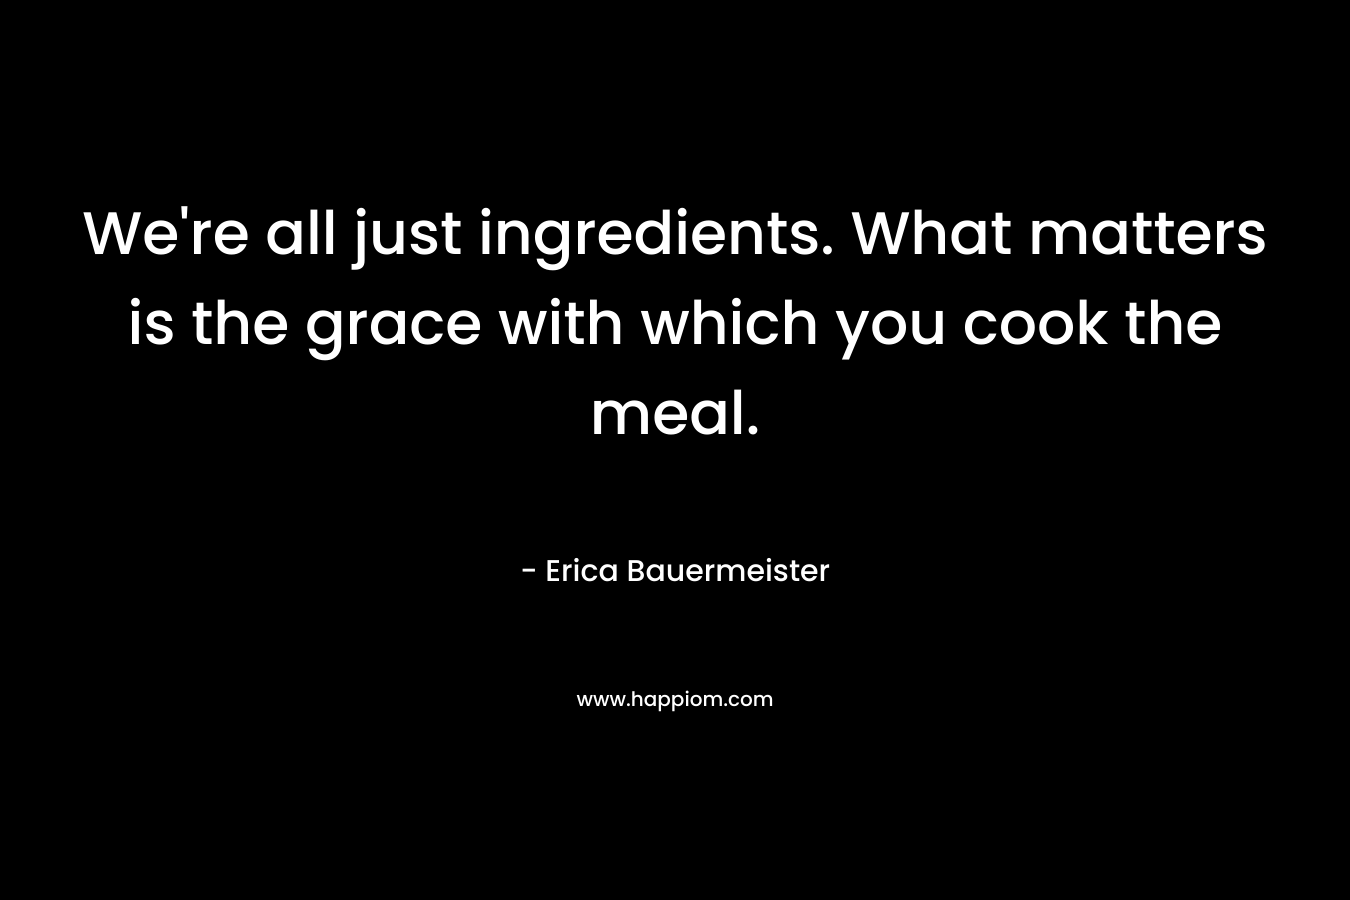 We’re all just ingredients. What matters is the grace with which you cook the meal. – Erica Bauermeister